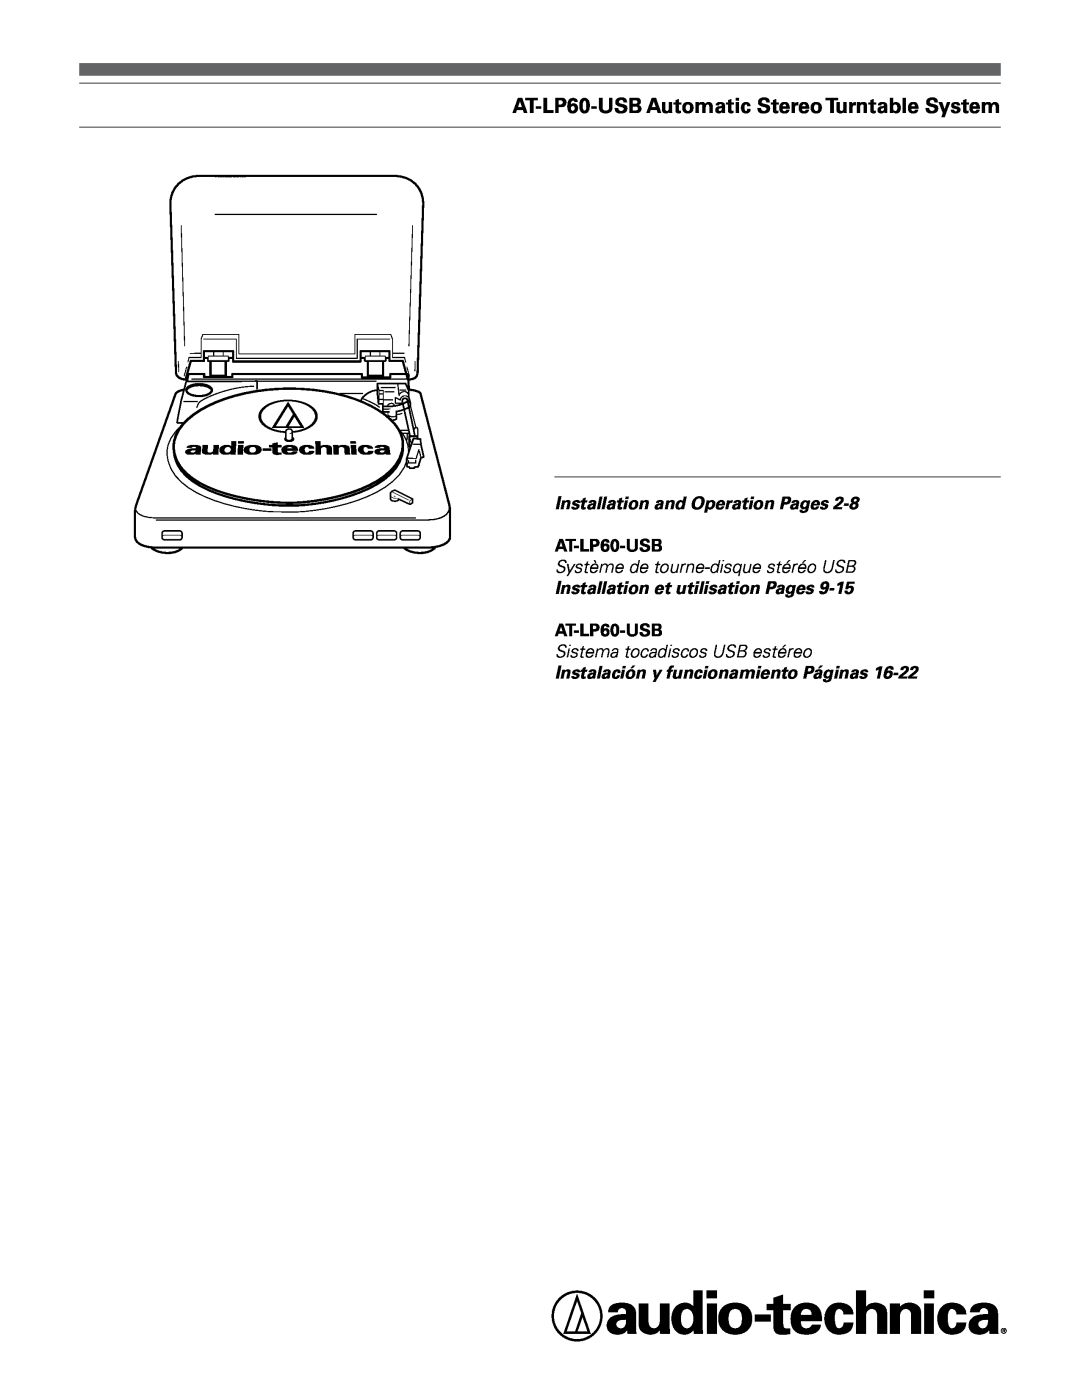 Audio-Technica manual AT-LP60-USBAutomatic Stereo Turntable System, Installation and Operation Pages 